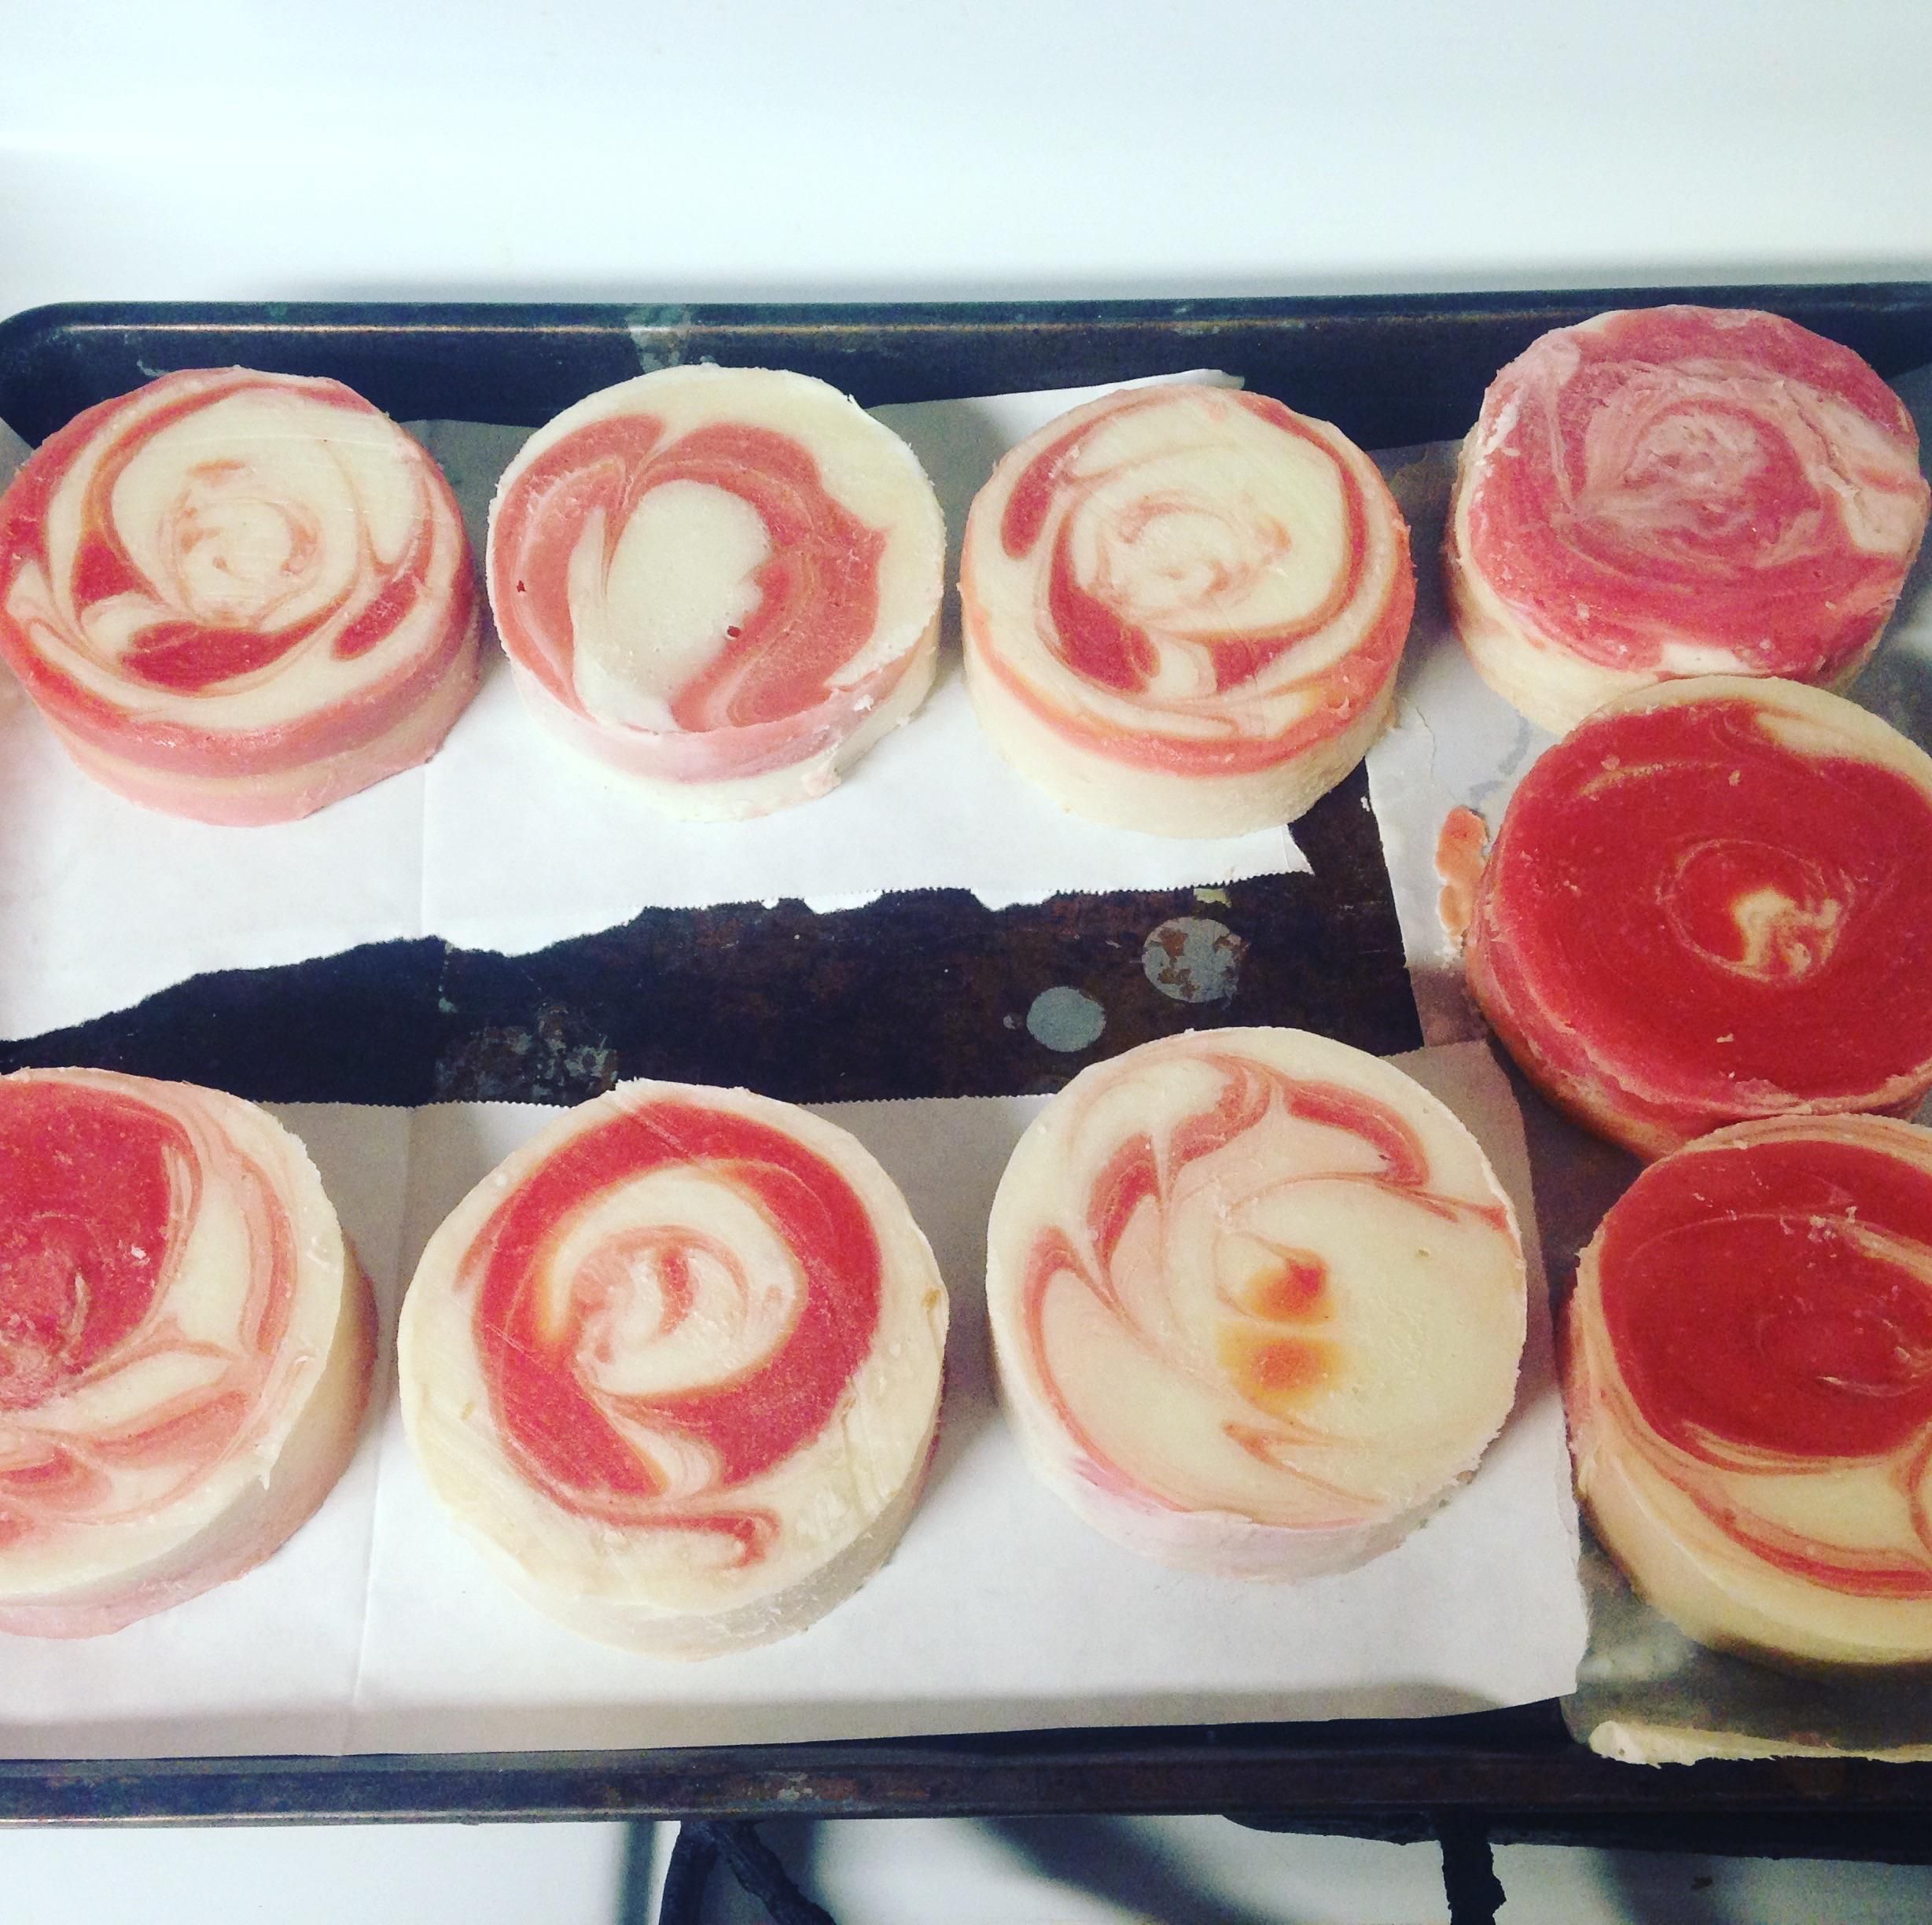 I too tried to make peppermint swirl soap, I have some fatty bacon rolls now.